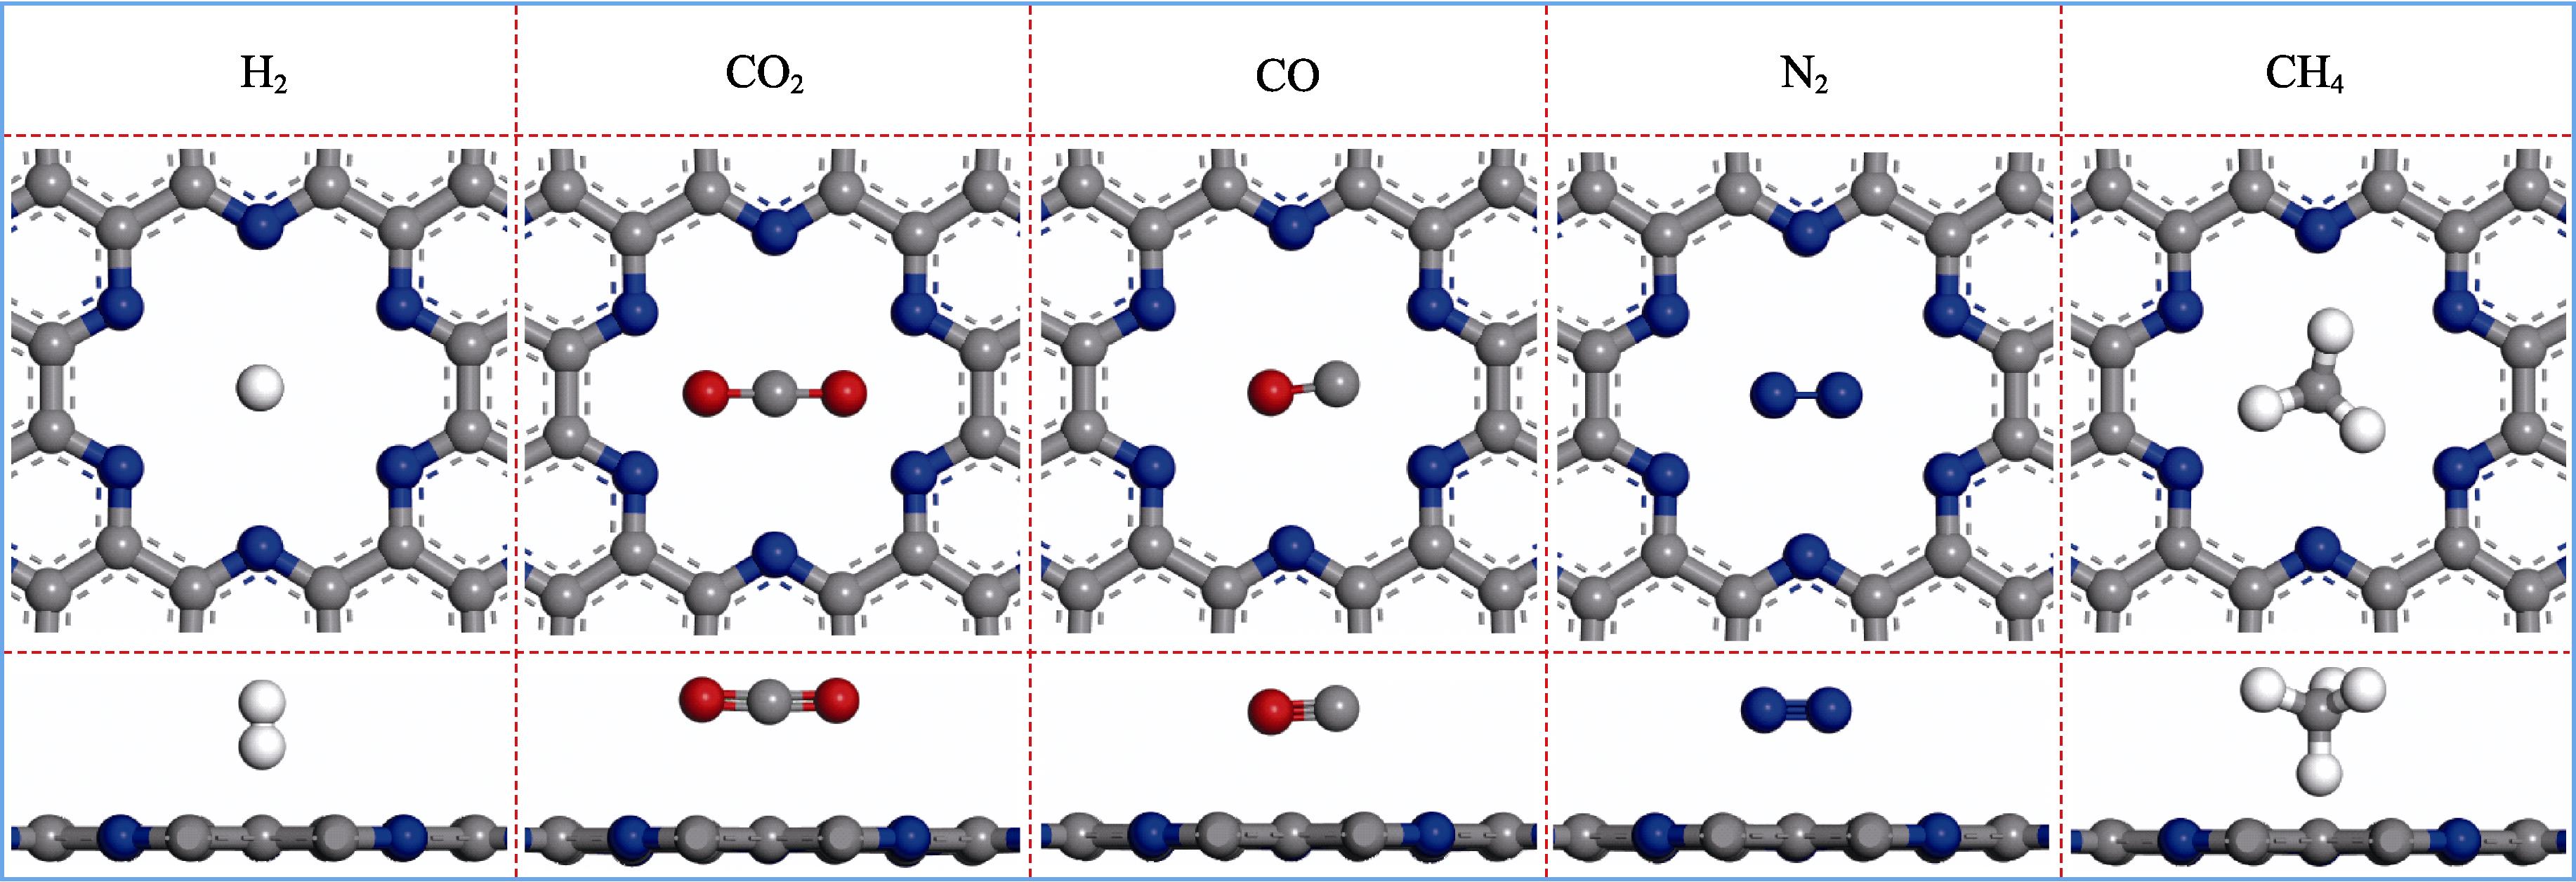 The most stable adsorption configurations of gases in C9N4 membrane